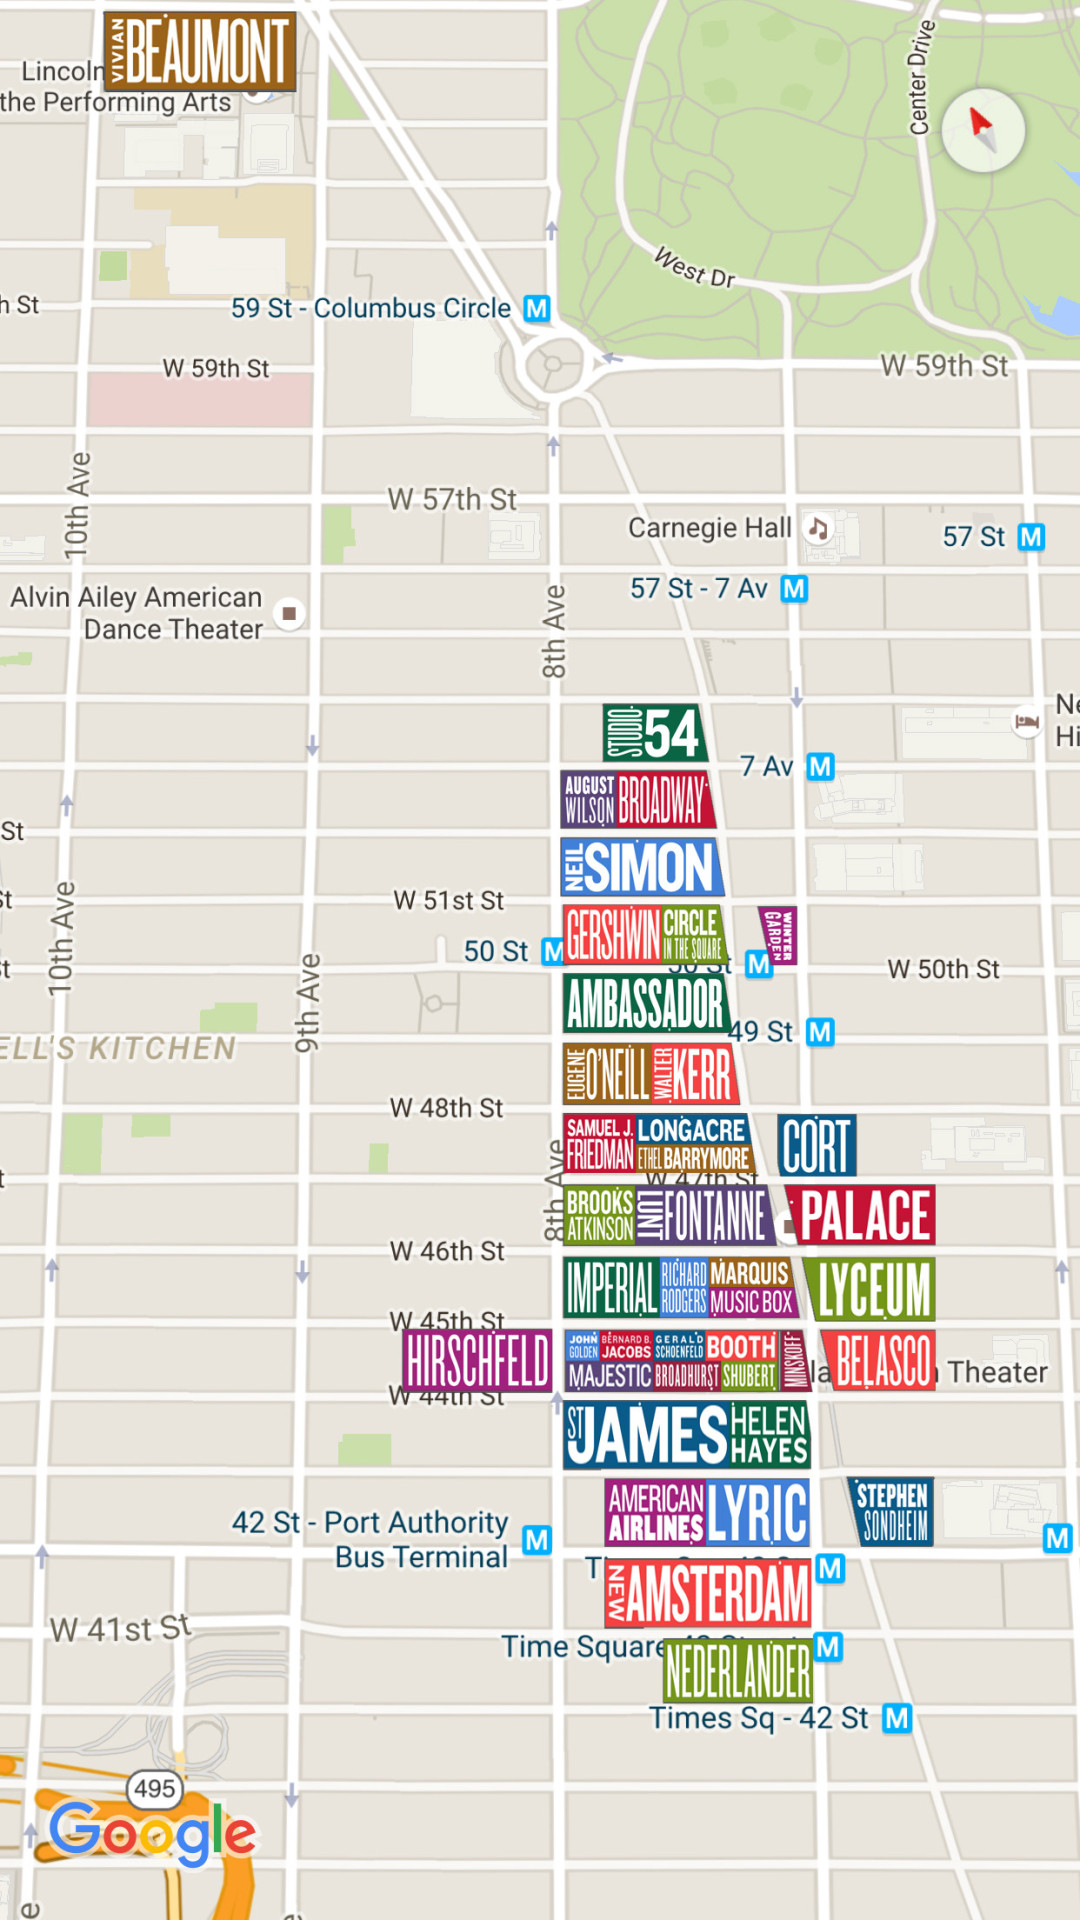 Map of all Broadway Theaters in New York City. Maps on the Web